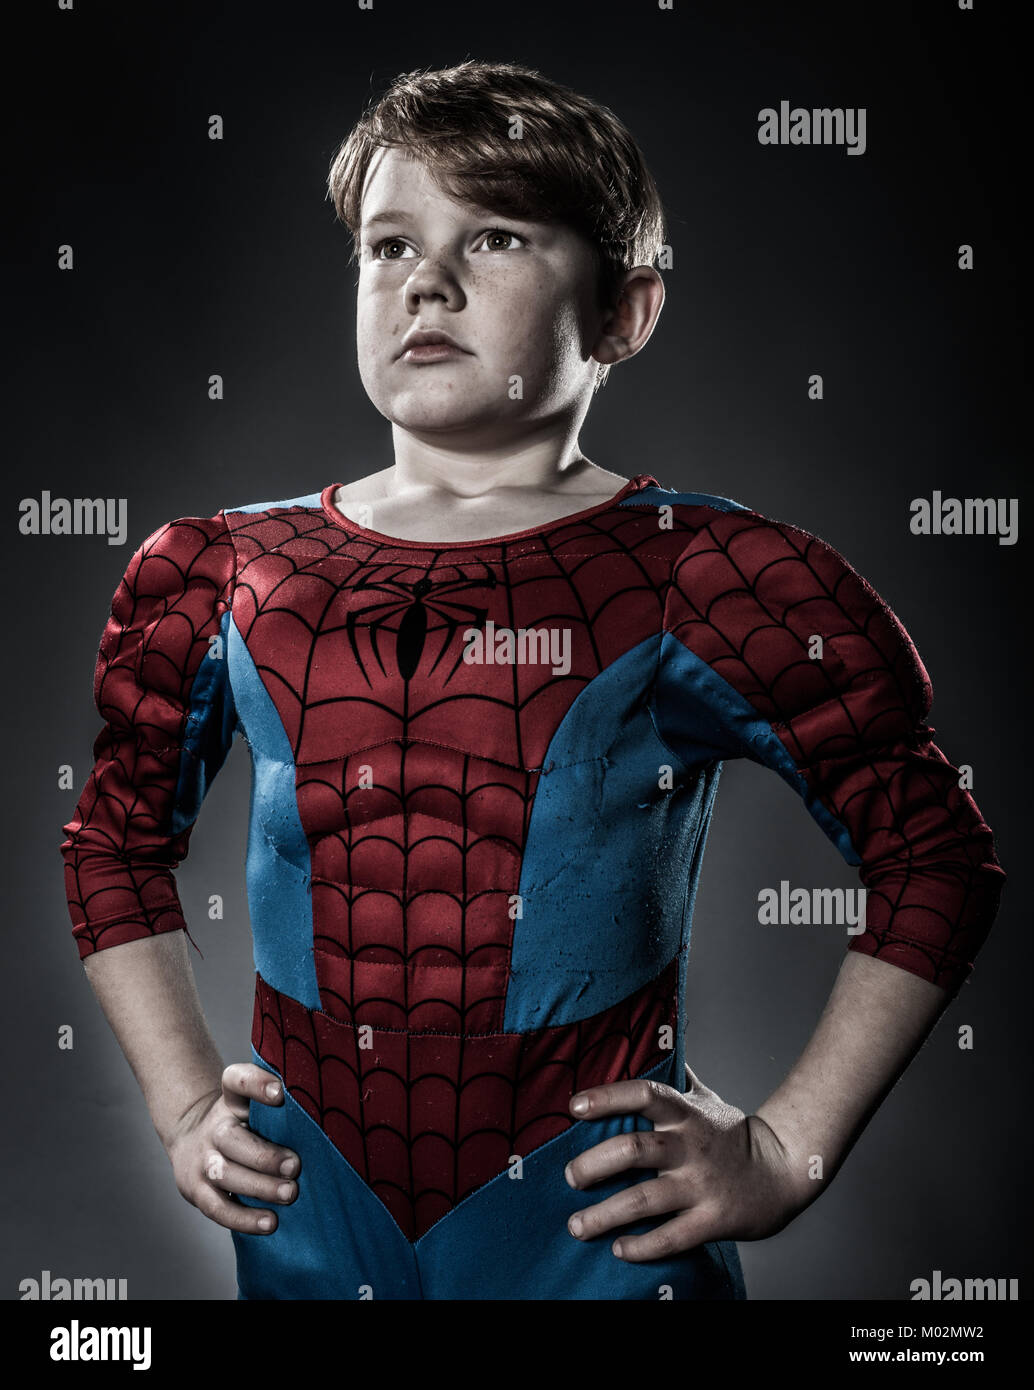 A young boy dressed as Spiderman looking heroic Stock Photo